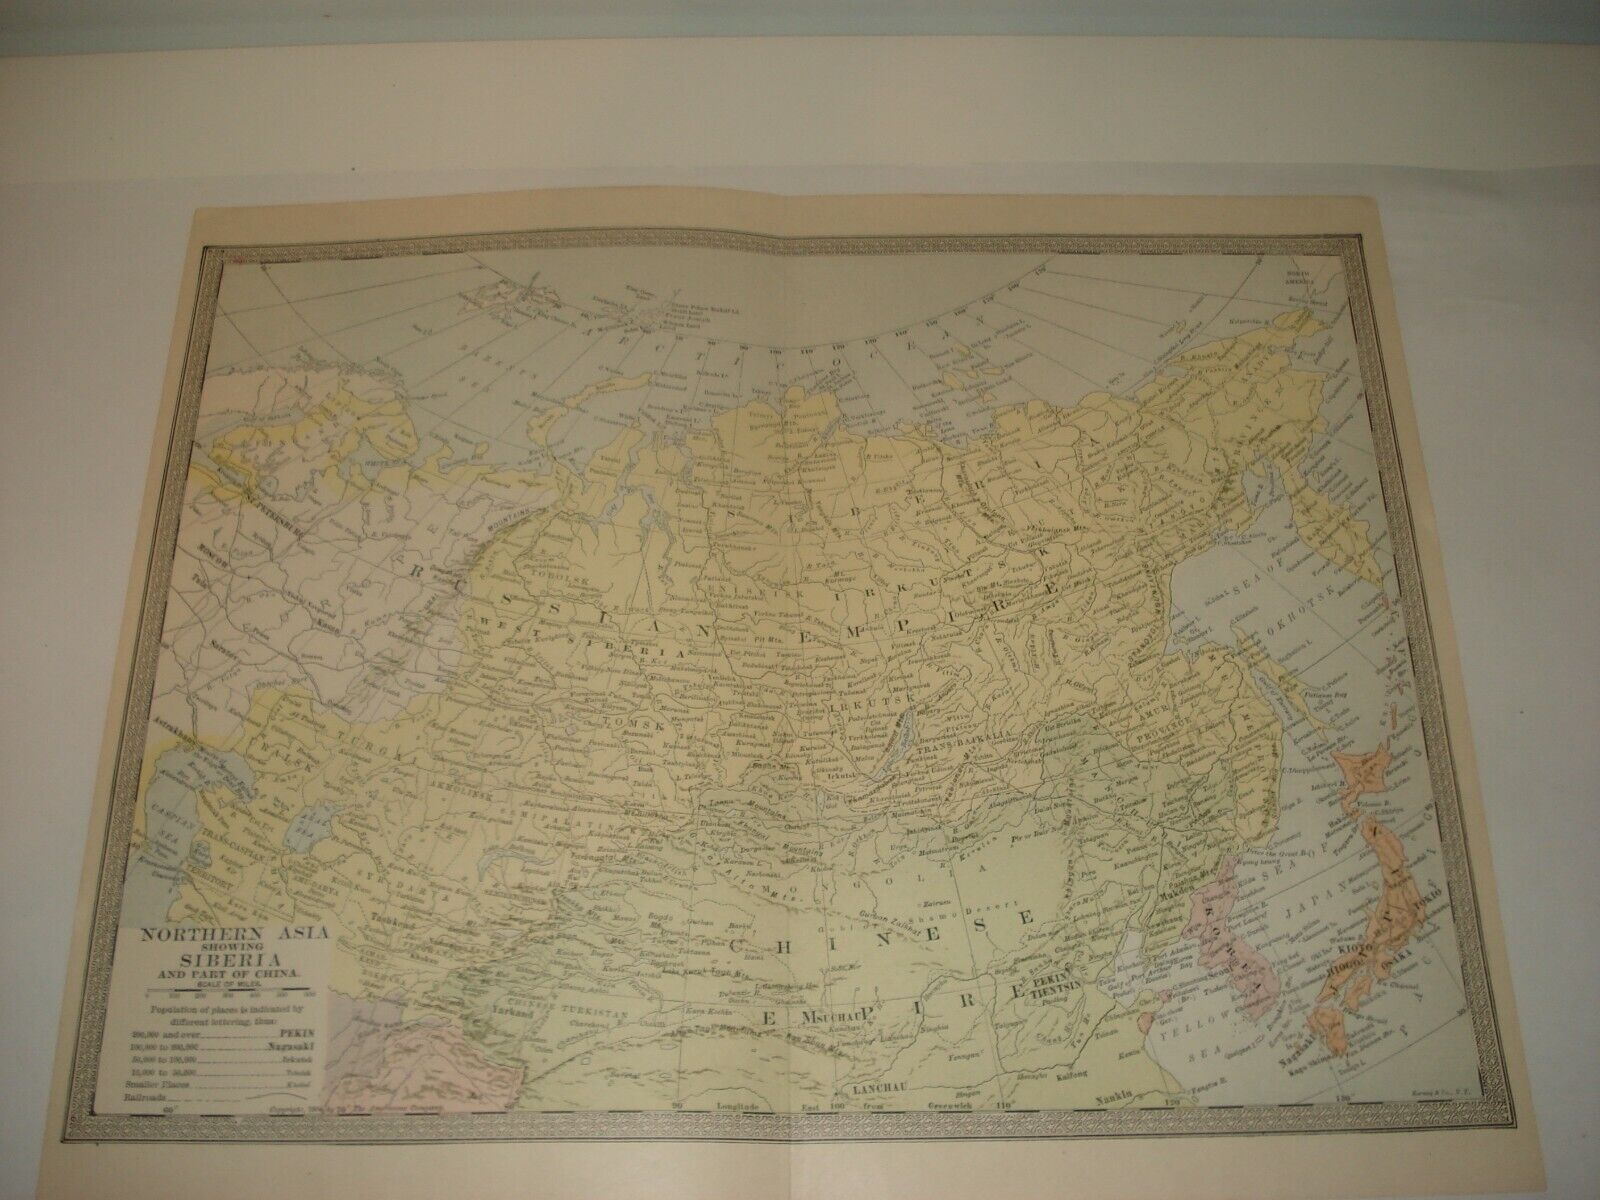 Lot of 5 Antique Maps 1903 1904  Asia Colorful Map Relief Rand McNally Без бренда - фотография #4